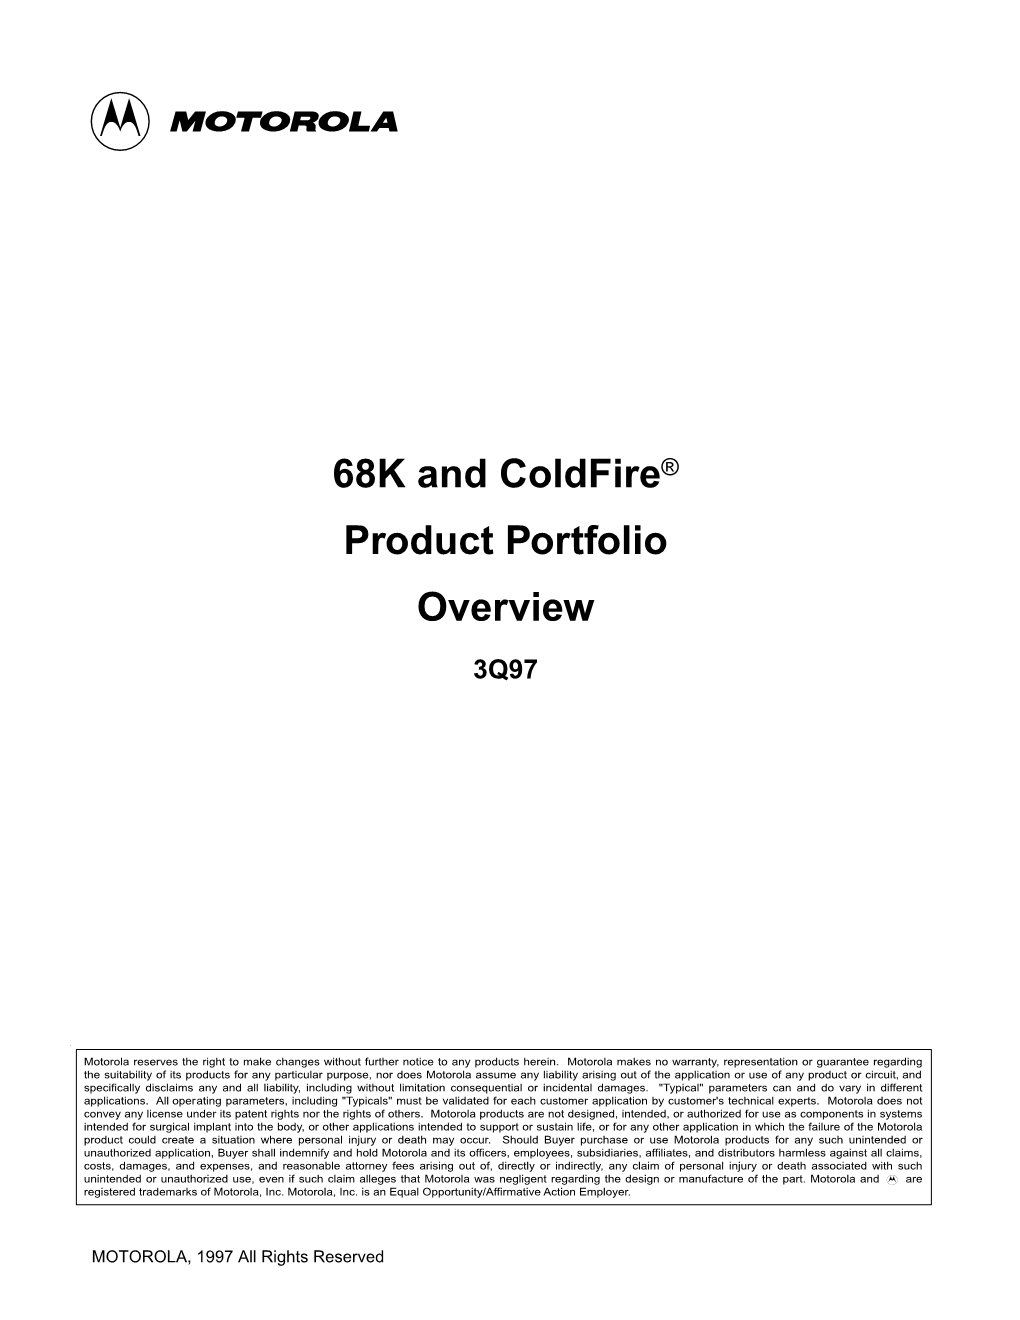 68K and Coldfire¨ Product Portfolio Overview